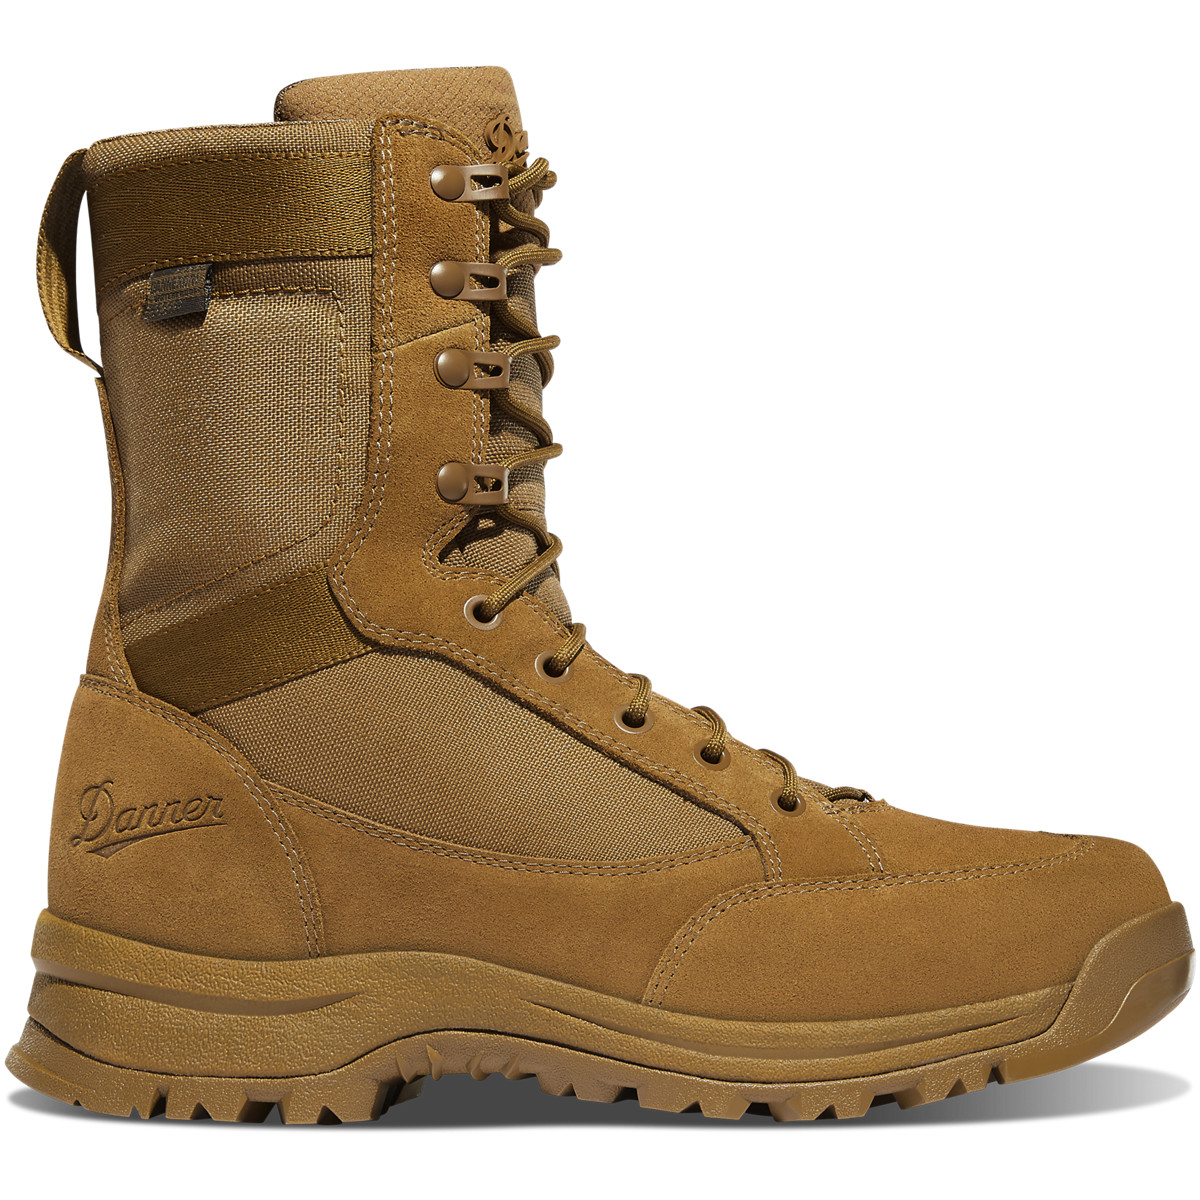 Details about   Danner Men's 55316 Tanicus 8" Coyote Hot AR-670-1 Military Tactical Shoes Boots